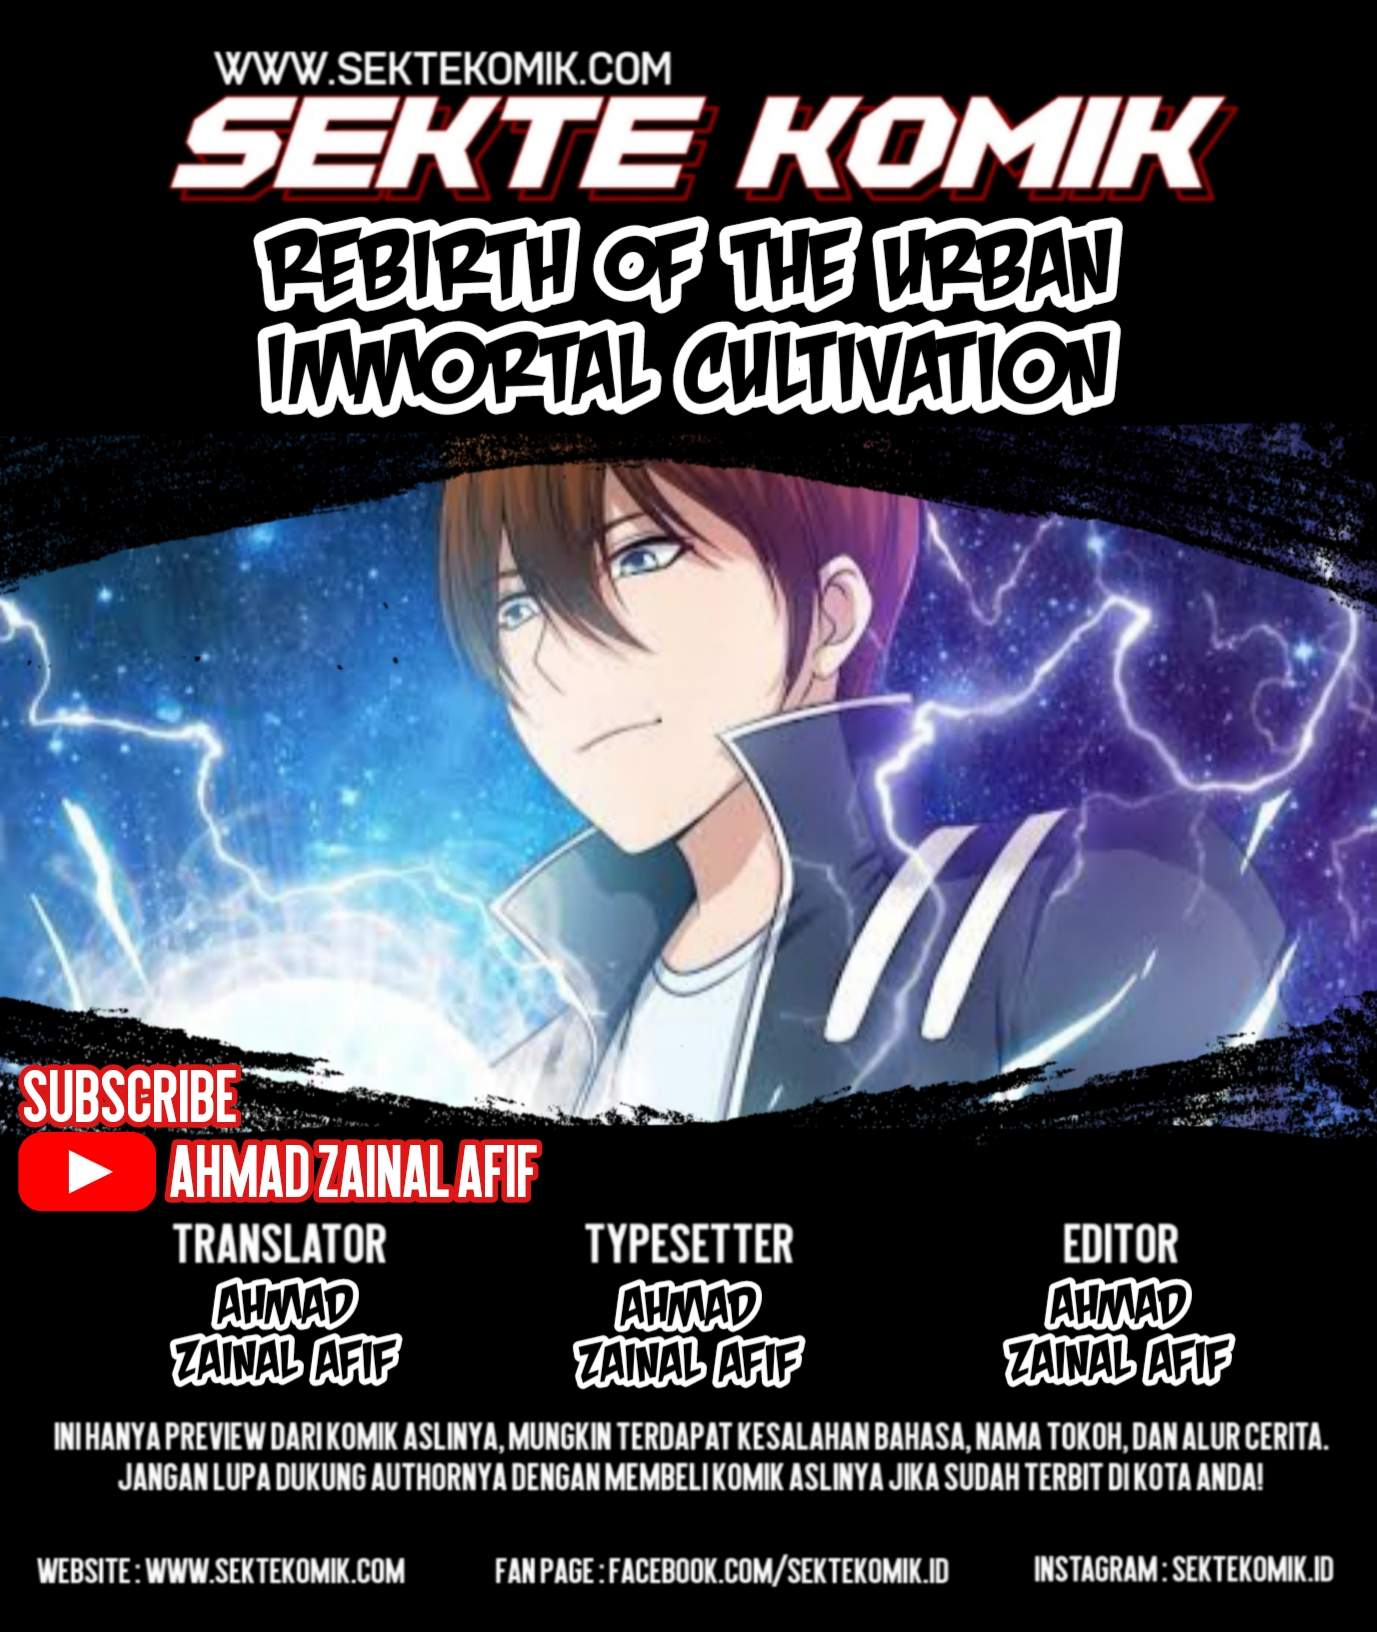 Baca Rebirth of the Urban Immortal Cultivator Chapter 278 Bahasa Indonesi.....